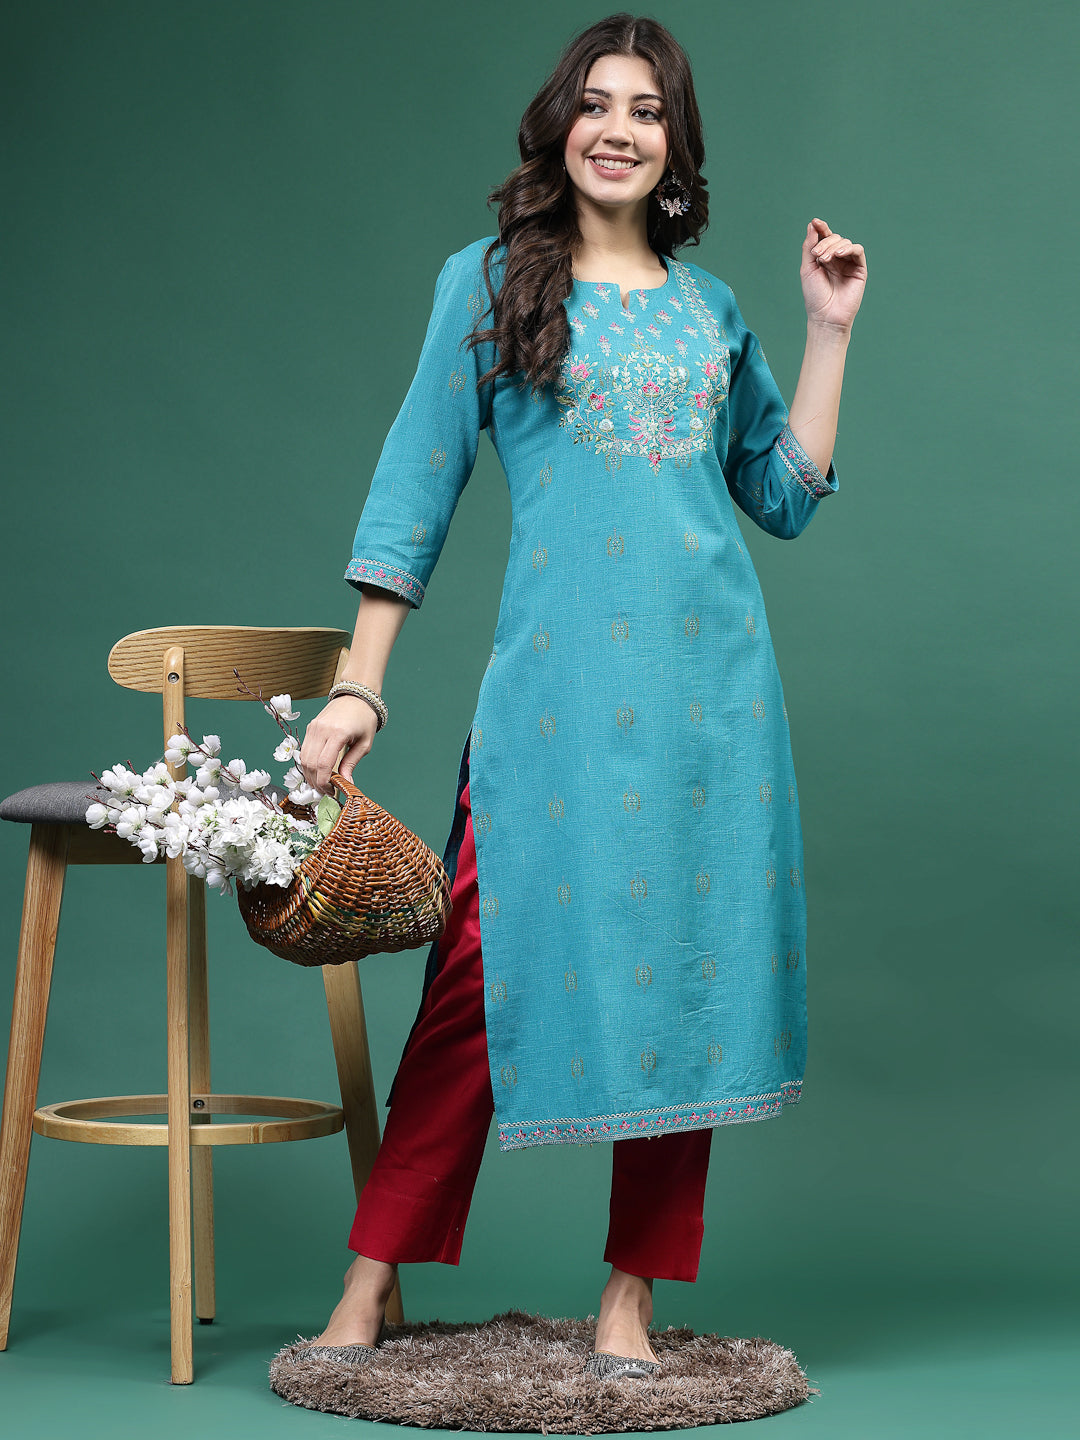 Women Turquoise Blue Color Embroidery Kurta